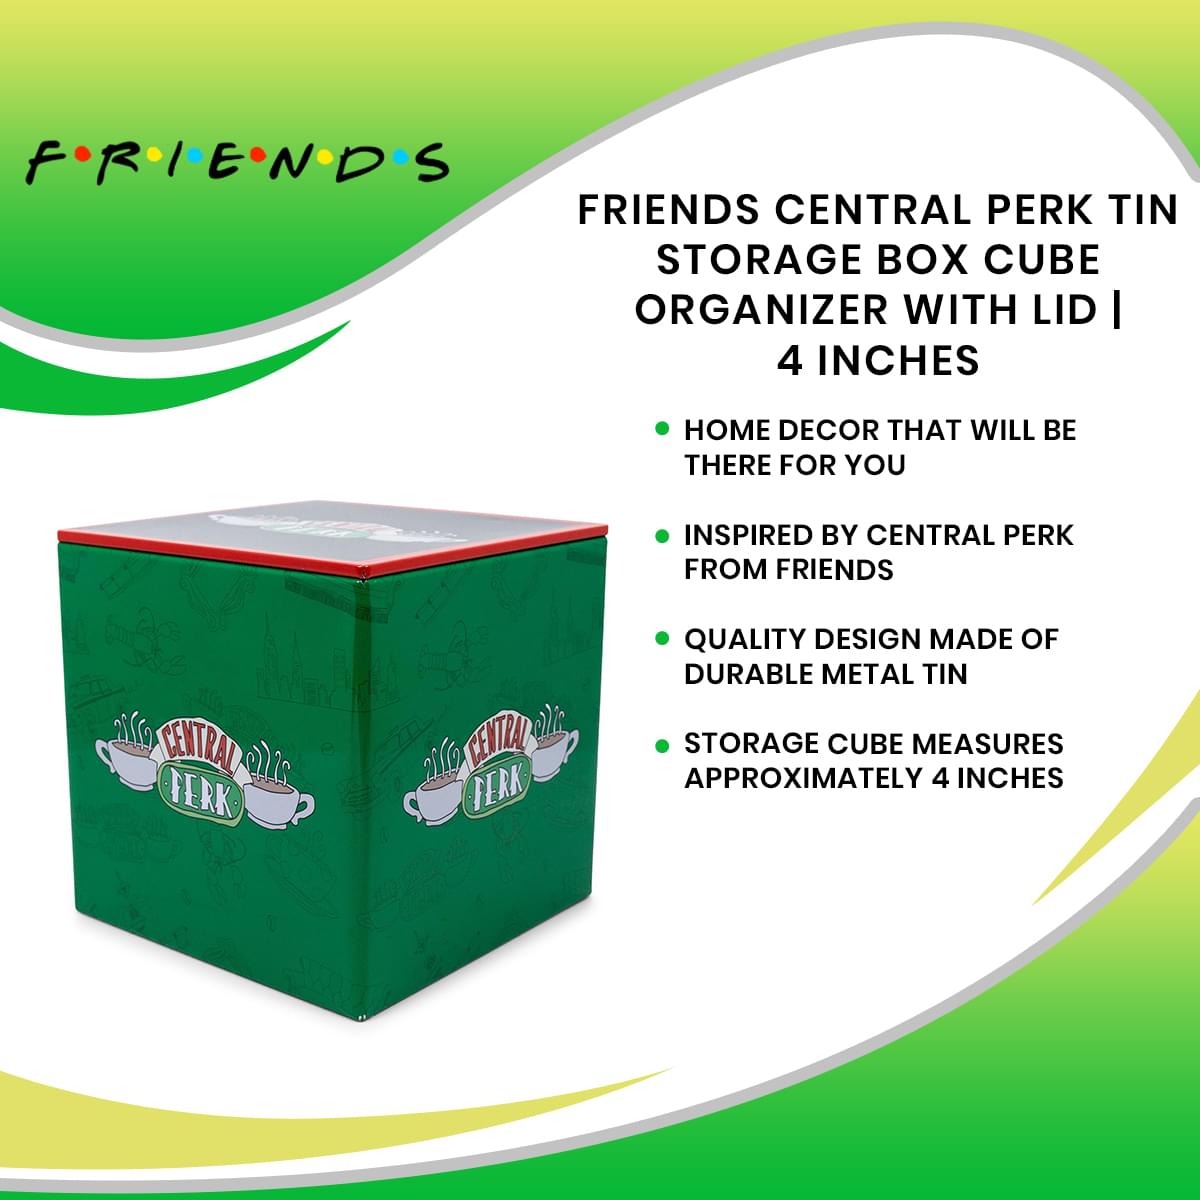 Friends Central Perk Tin Storage Box Cube Organizer with Lid | 4 Inches